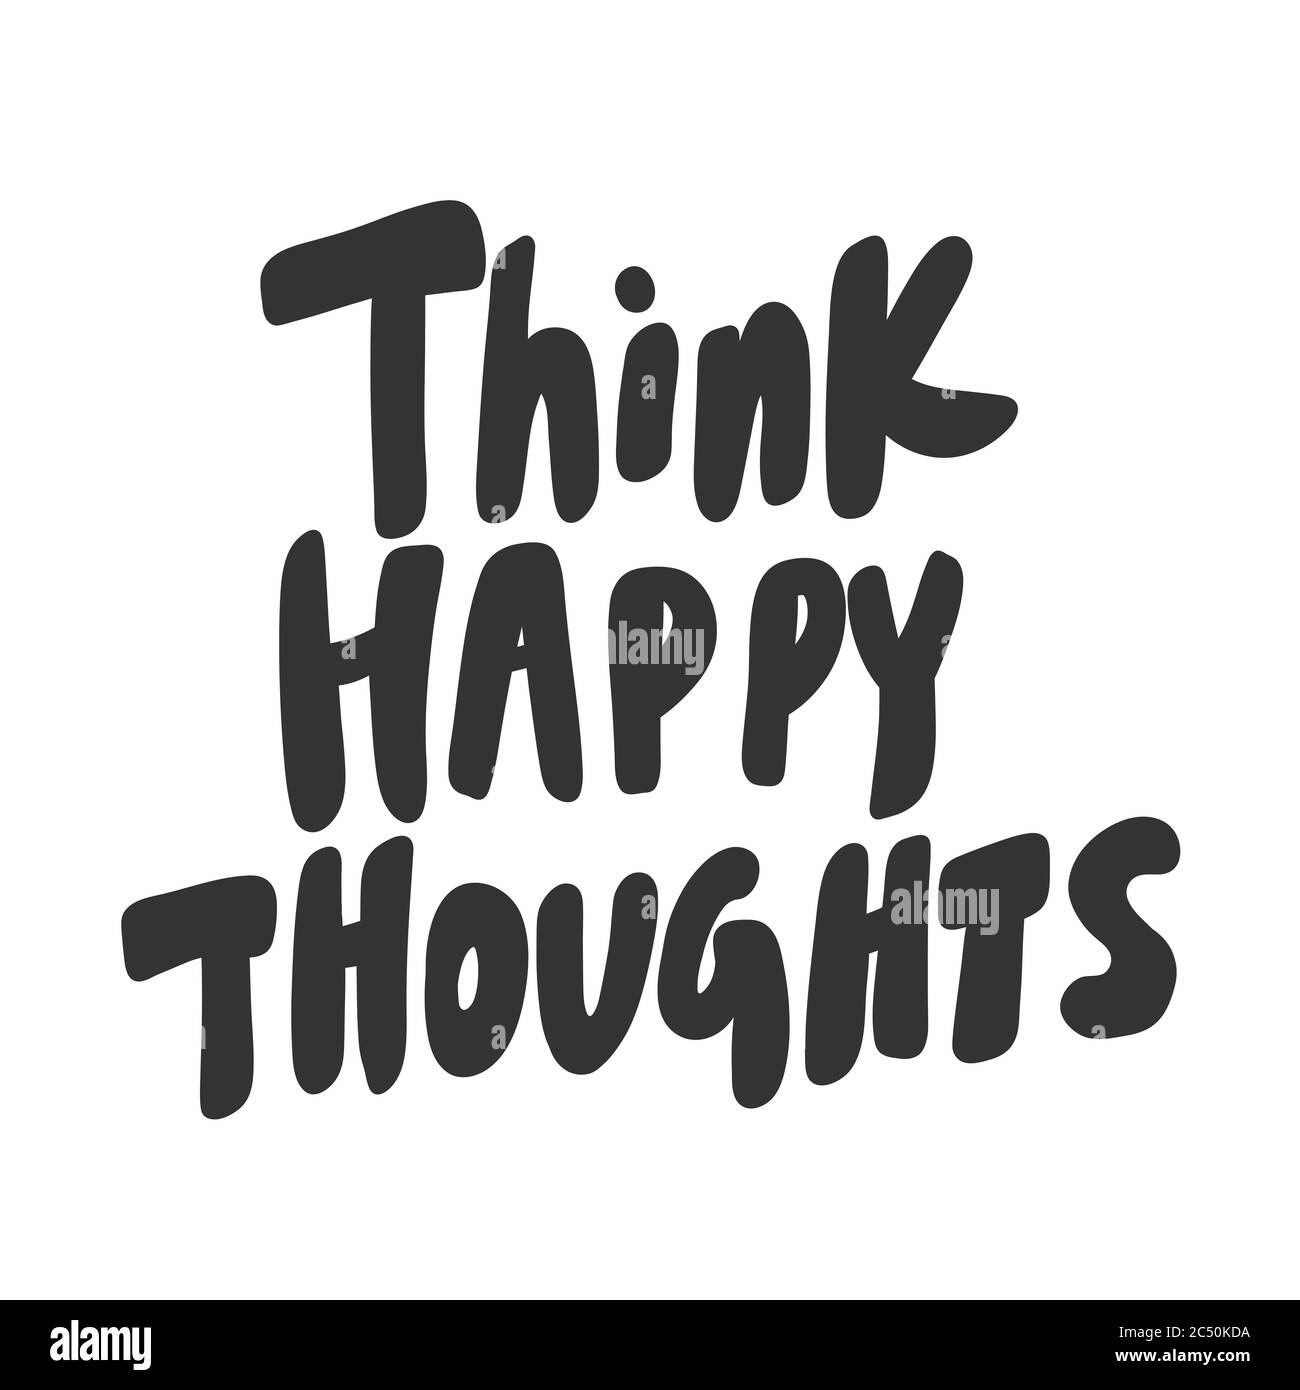 Think Happy Thoughts Vector Hand Drawn Illustration Sticker With Cartoon Lettering Good As A Sticker Video Blog Cover Social Media Message Gift Stock Vector Image Art Alamy